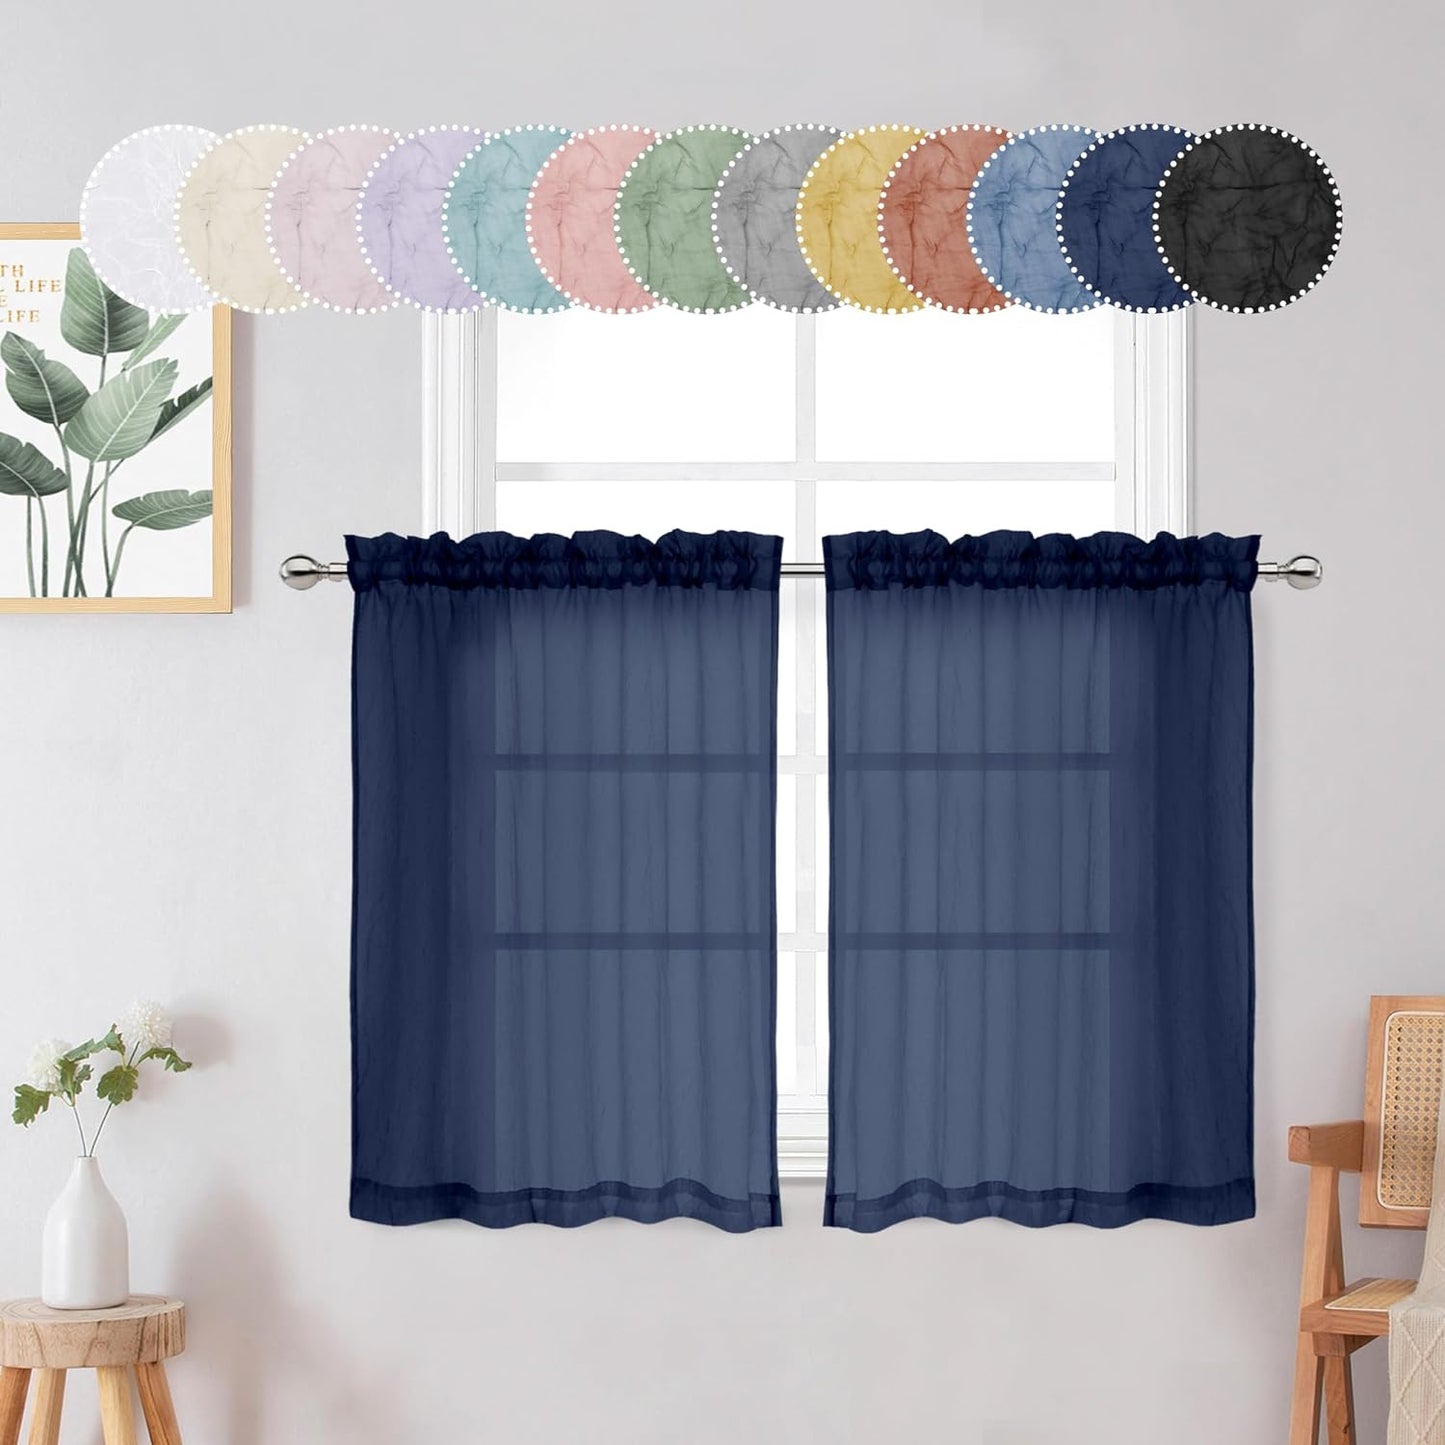 Crushed Sheer White Curtains 63 Inch Length 2 Panels, Light Filtering Solid Crinkle Voile Short Sheer Curtian for Bedroom Living Room, Each 42Wx63L Inches  Chyhomenyc Navy Blue 28 W X 36 L 